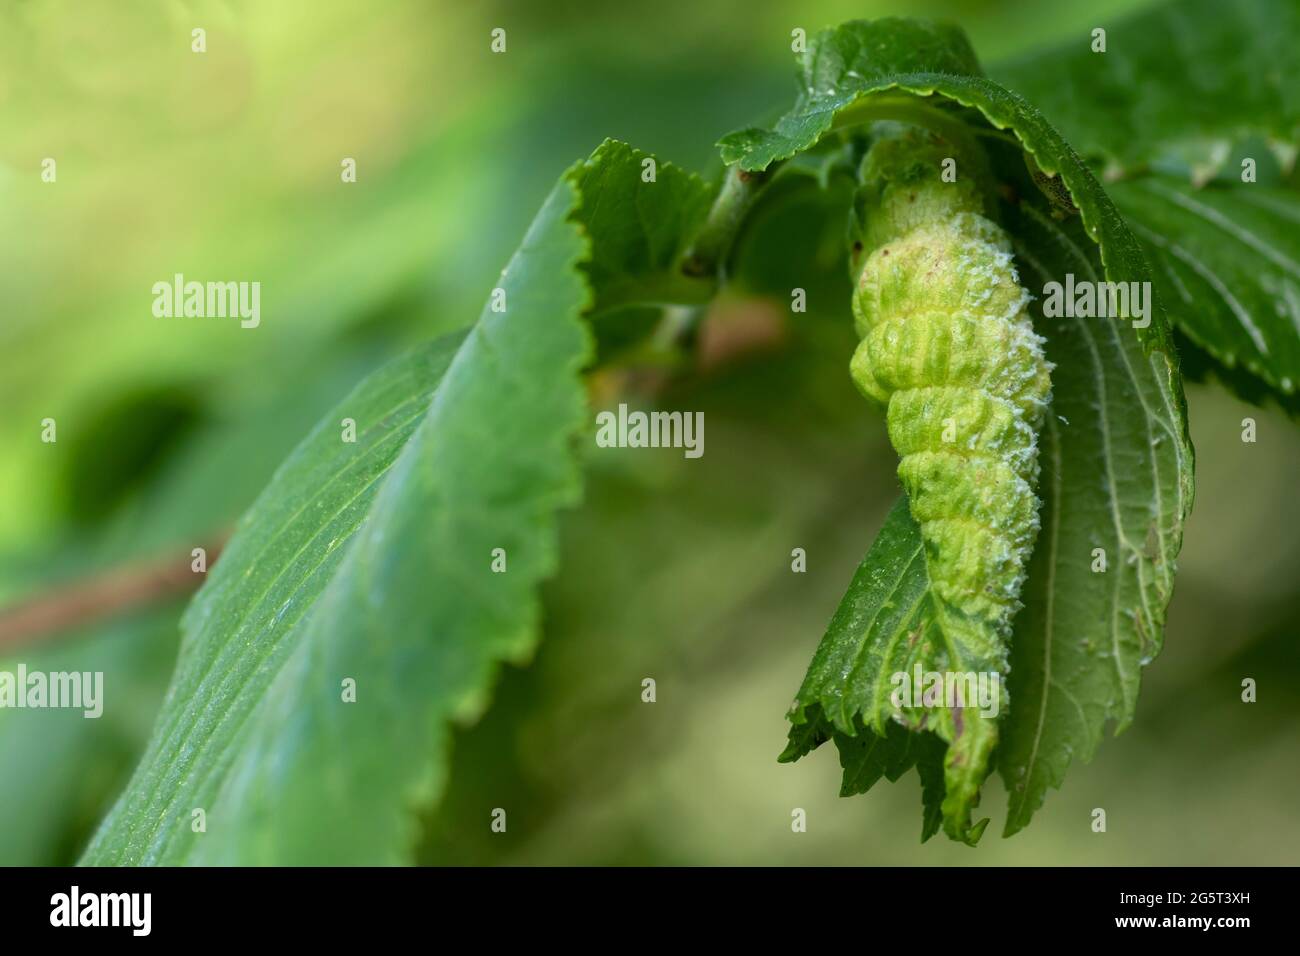 Curled elm leaf. Damage caused by the Elm-currant aphid (Eriosoma ulmi) Stock Photo